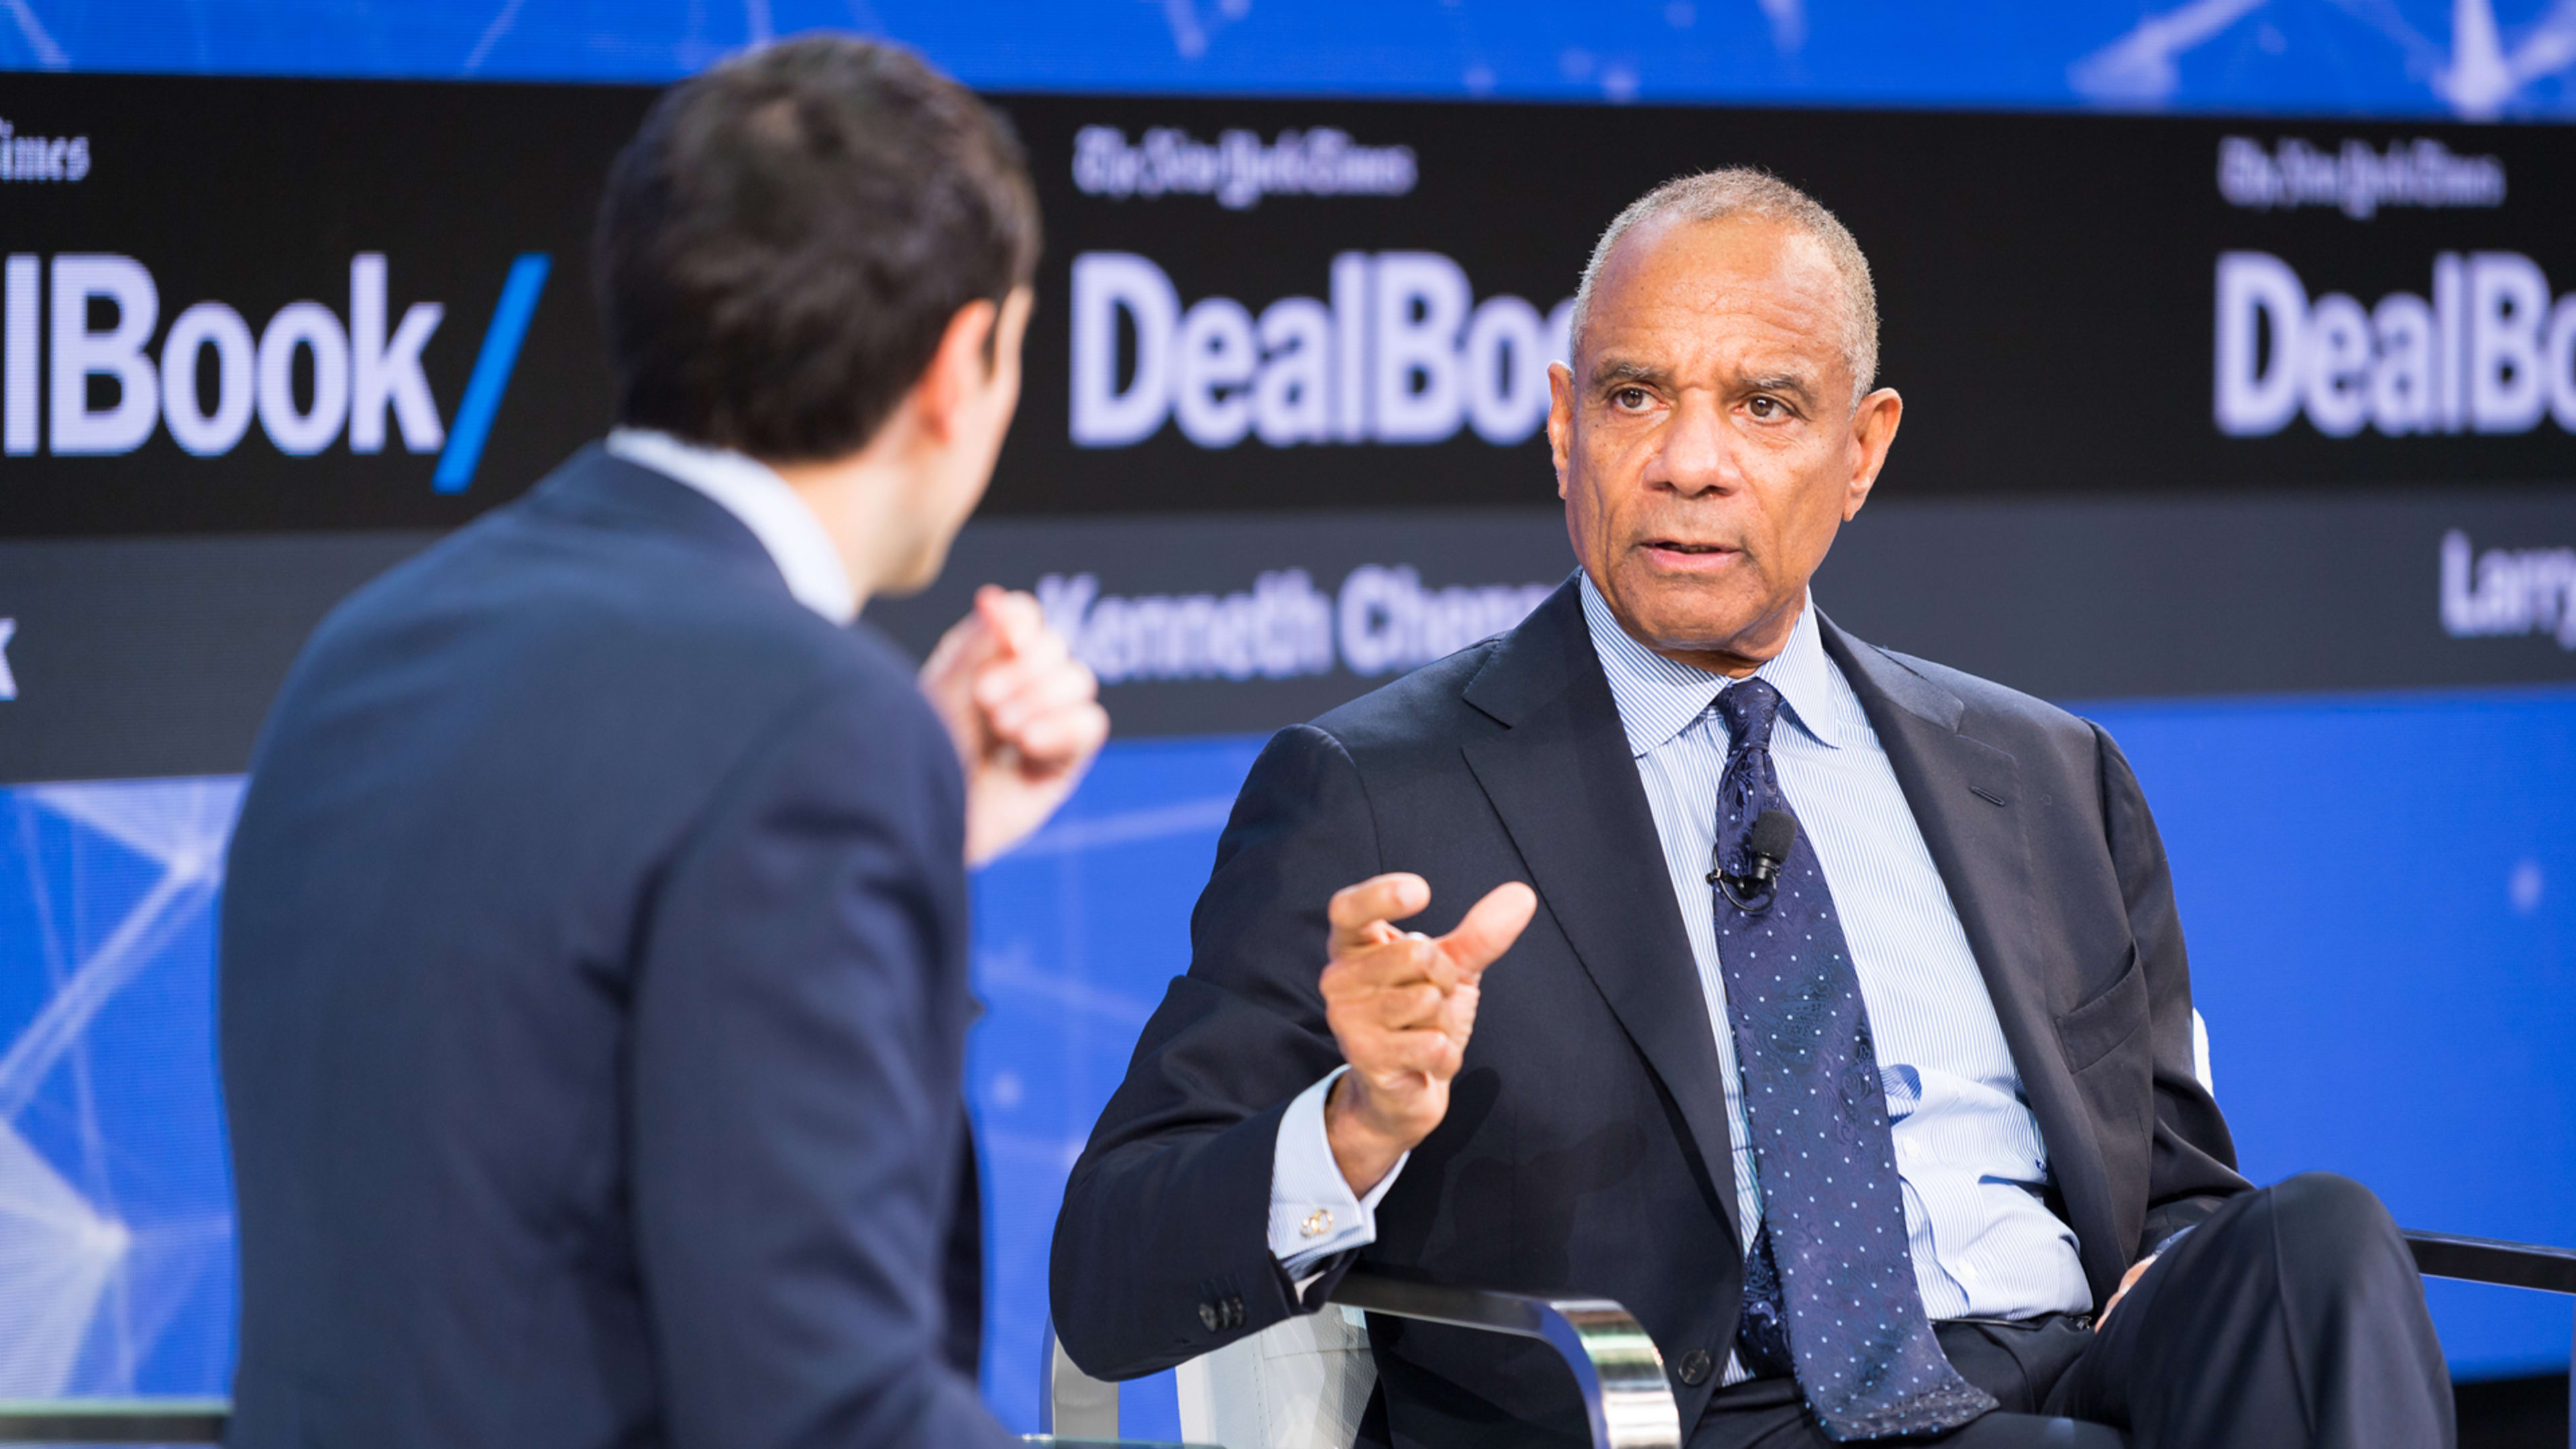 Facebook finally appoints a non-white board member: AmEx CEO Kenneth Chenault